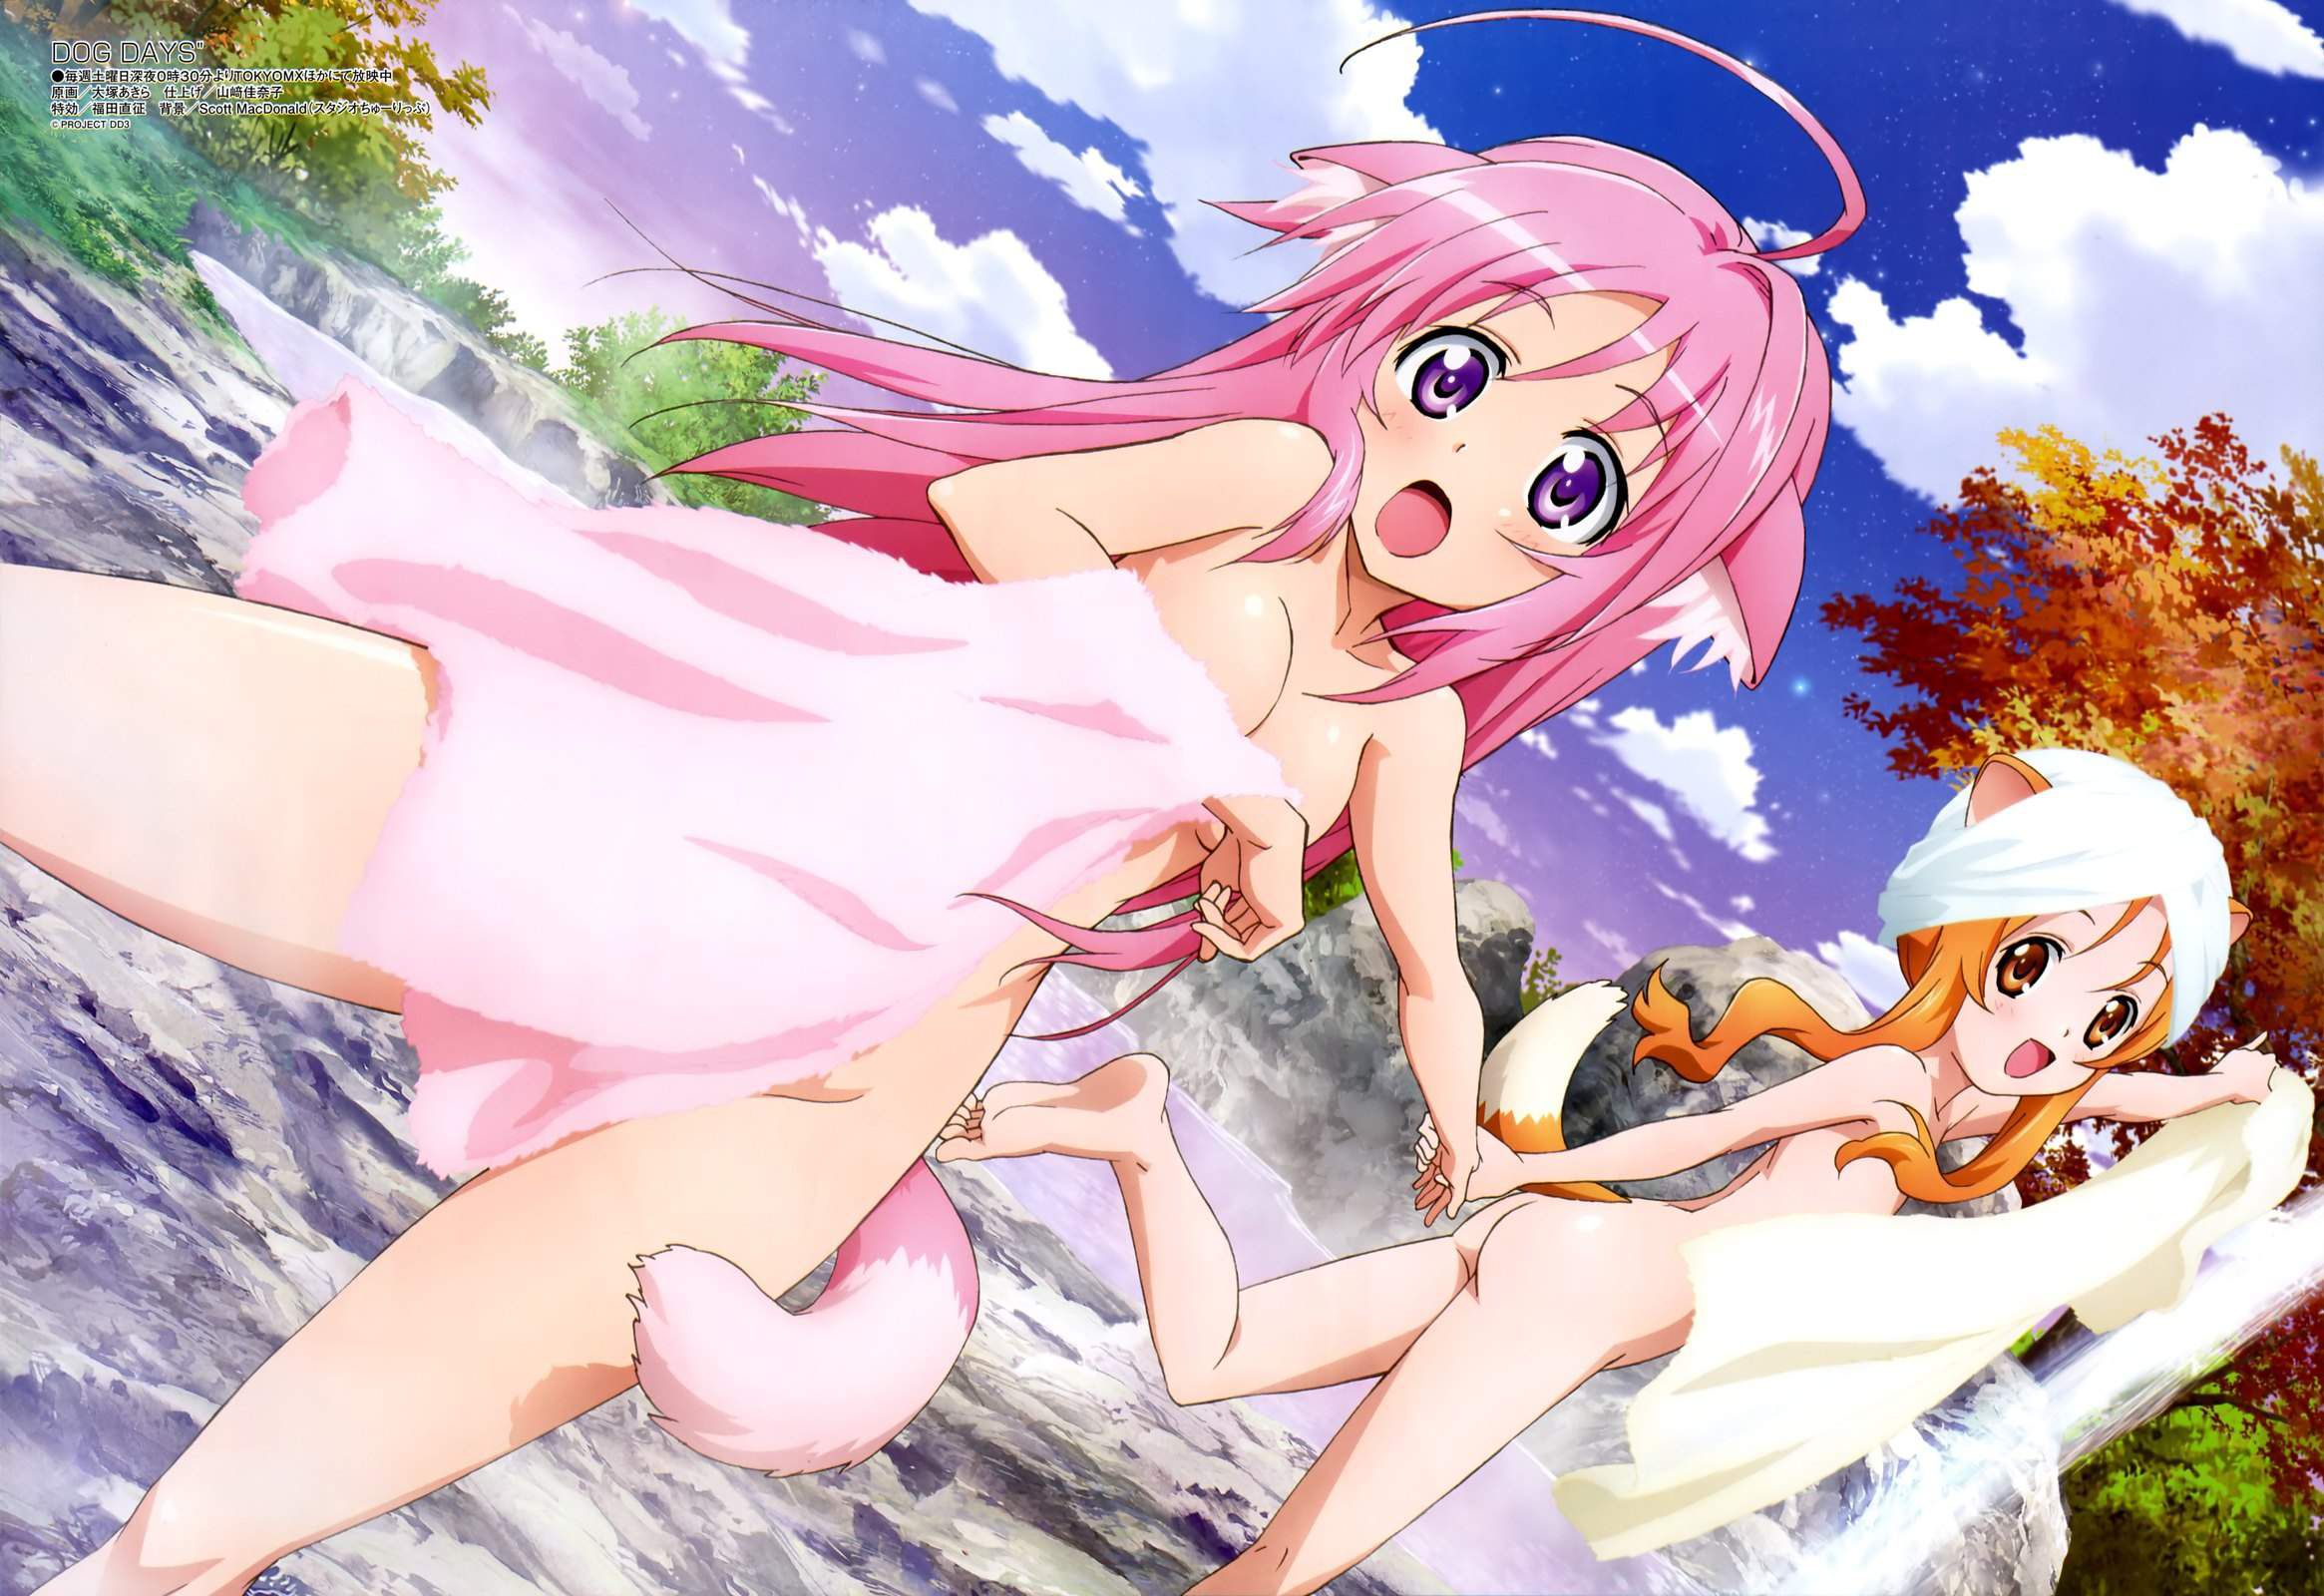 DOG DAYS millhiore F biscotti in one shot without you want 25